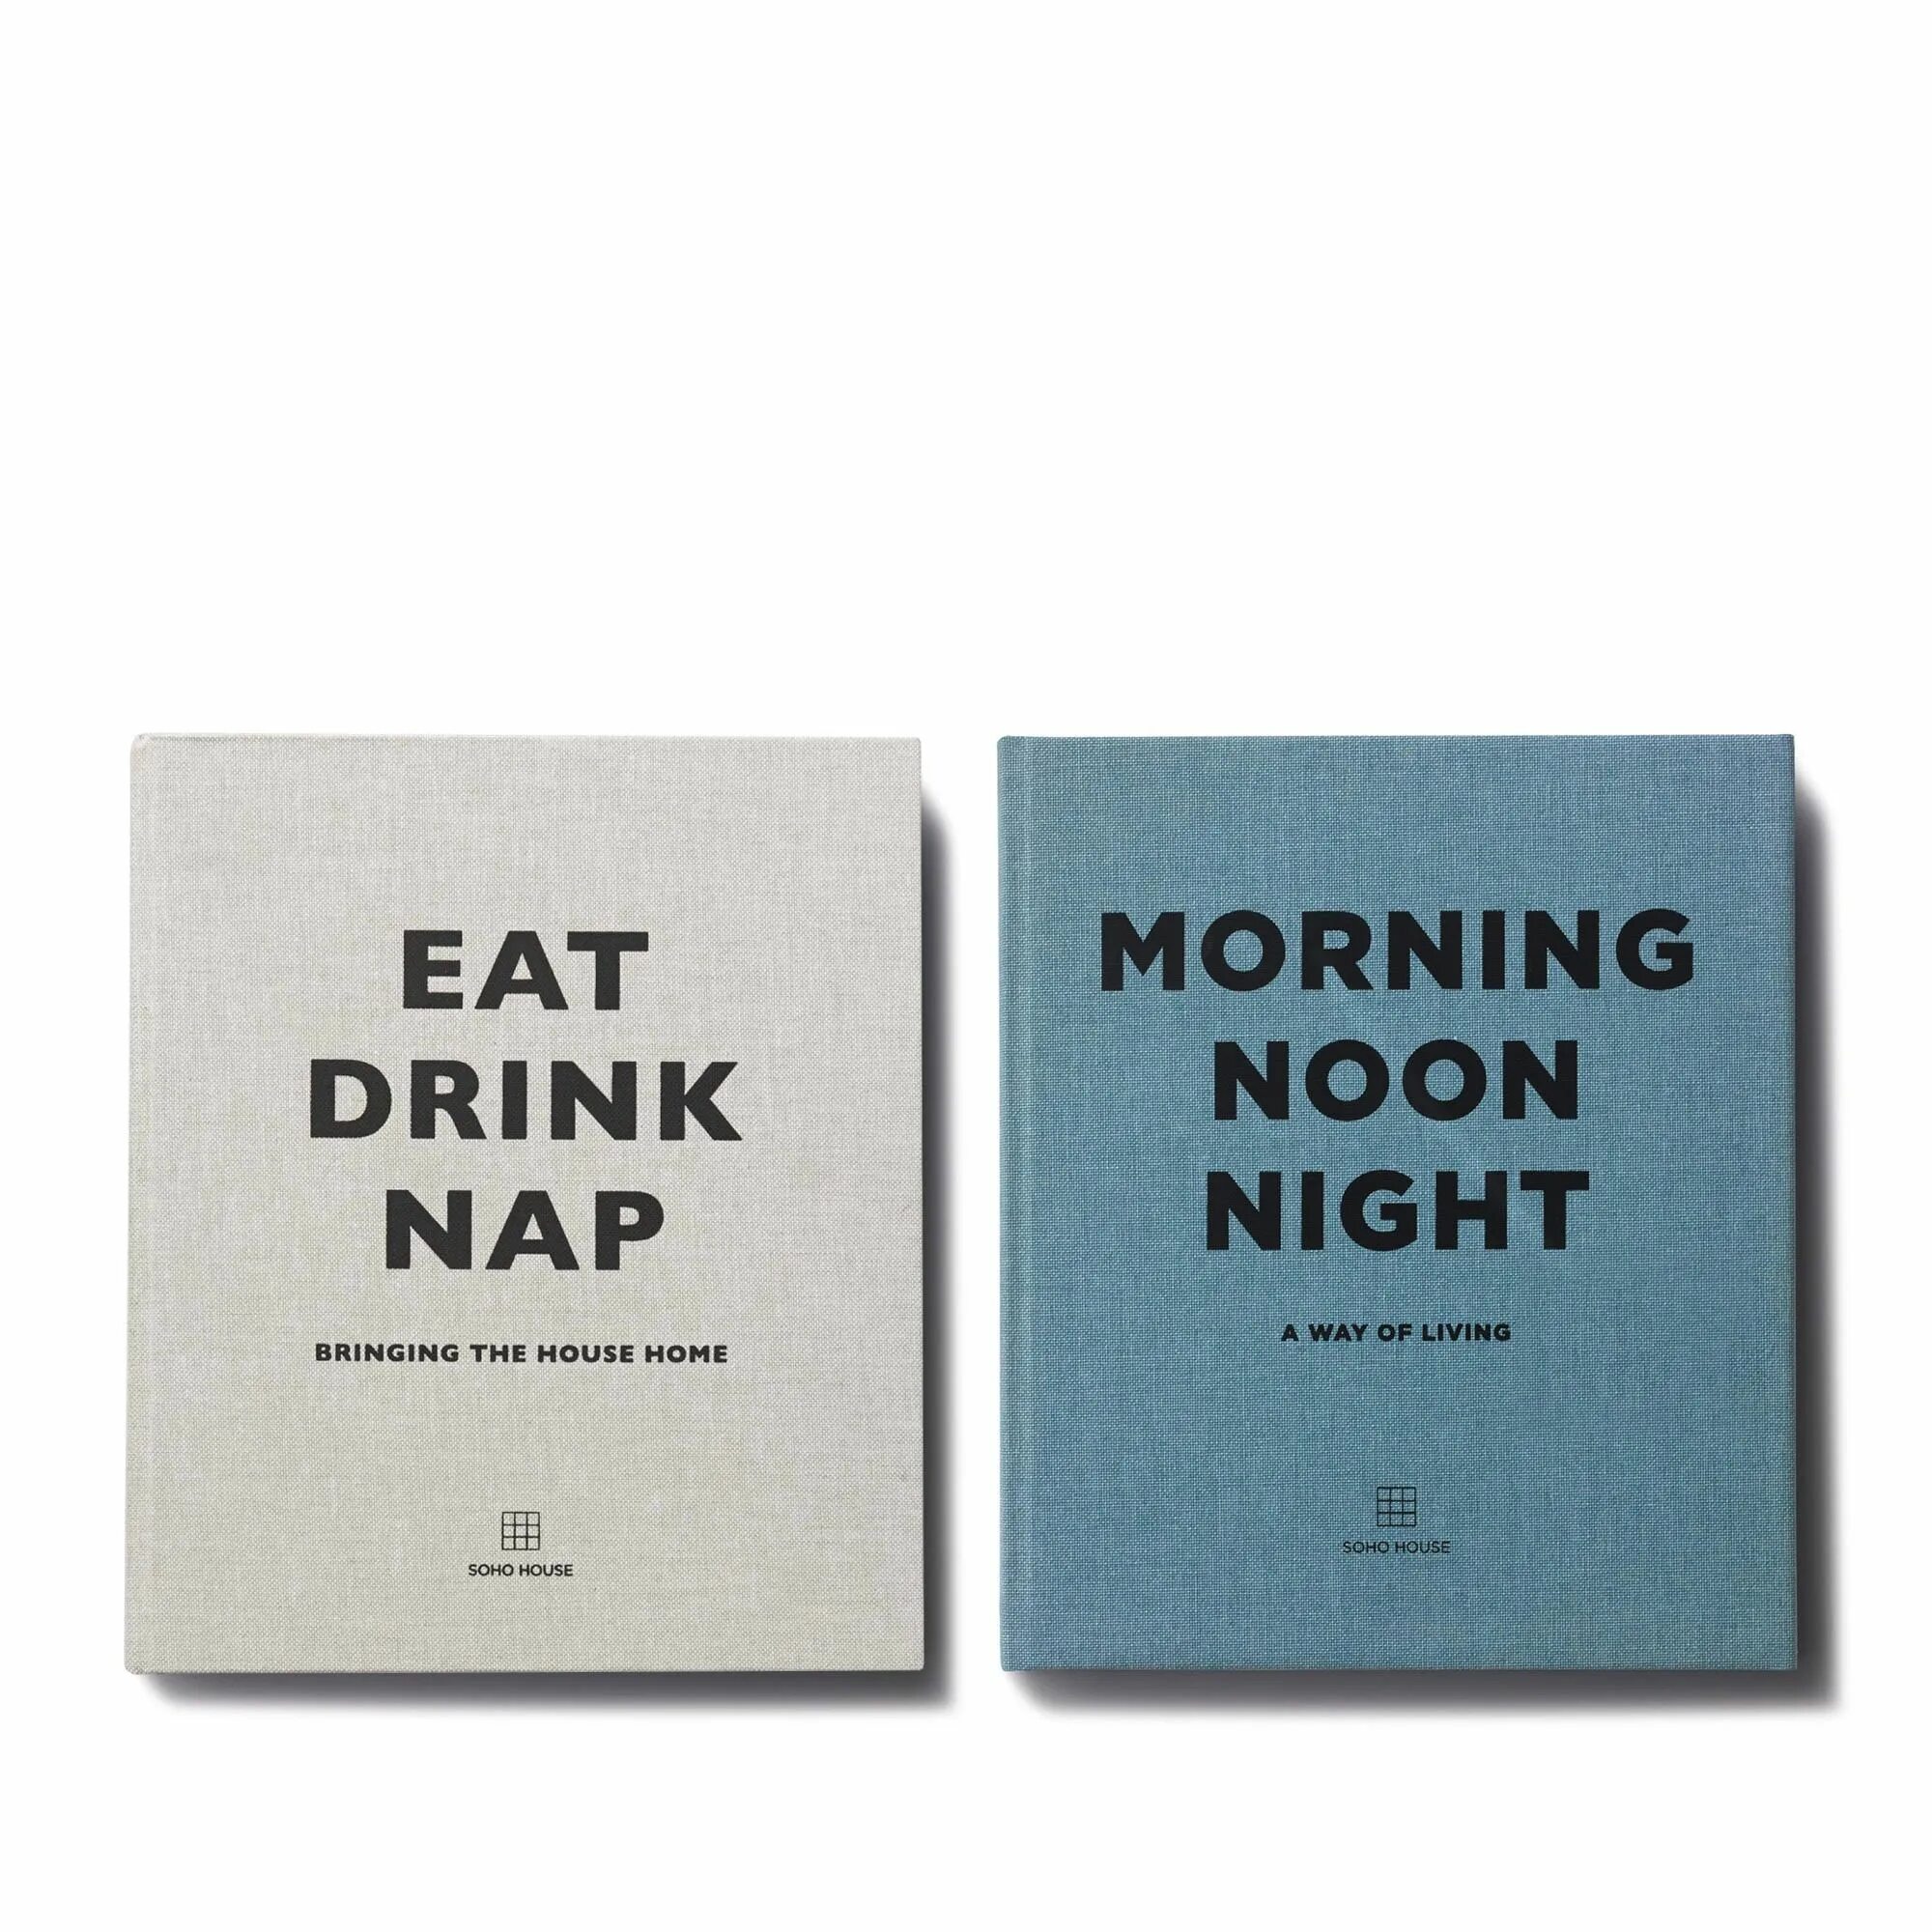 Noon night. Eat, Drink, nap. Morning Noon Night книга. Eat Drink nap book. Eat Drink nap: bringing the House Home.